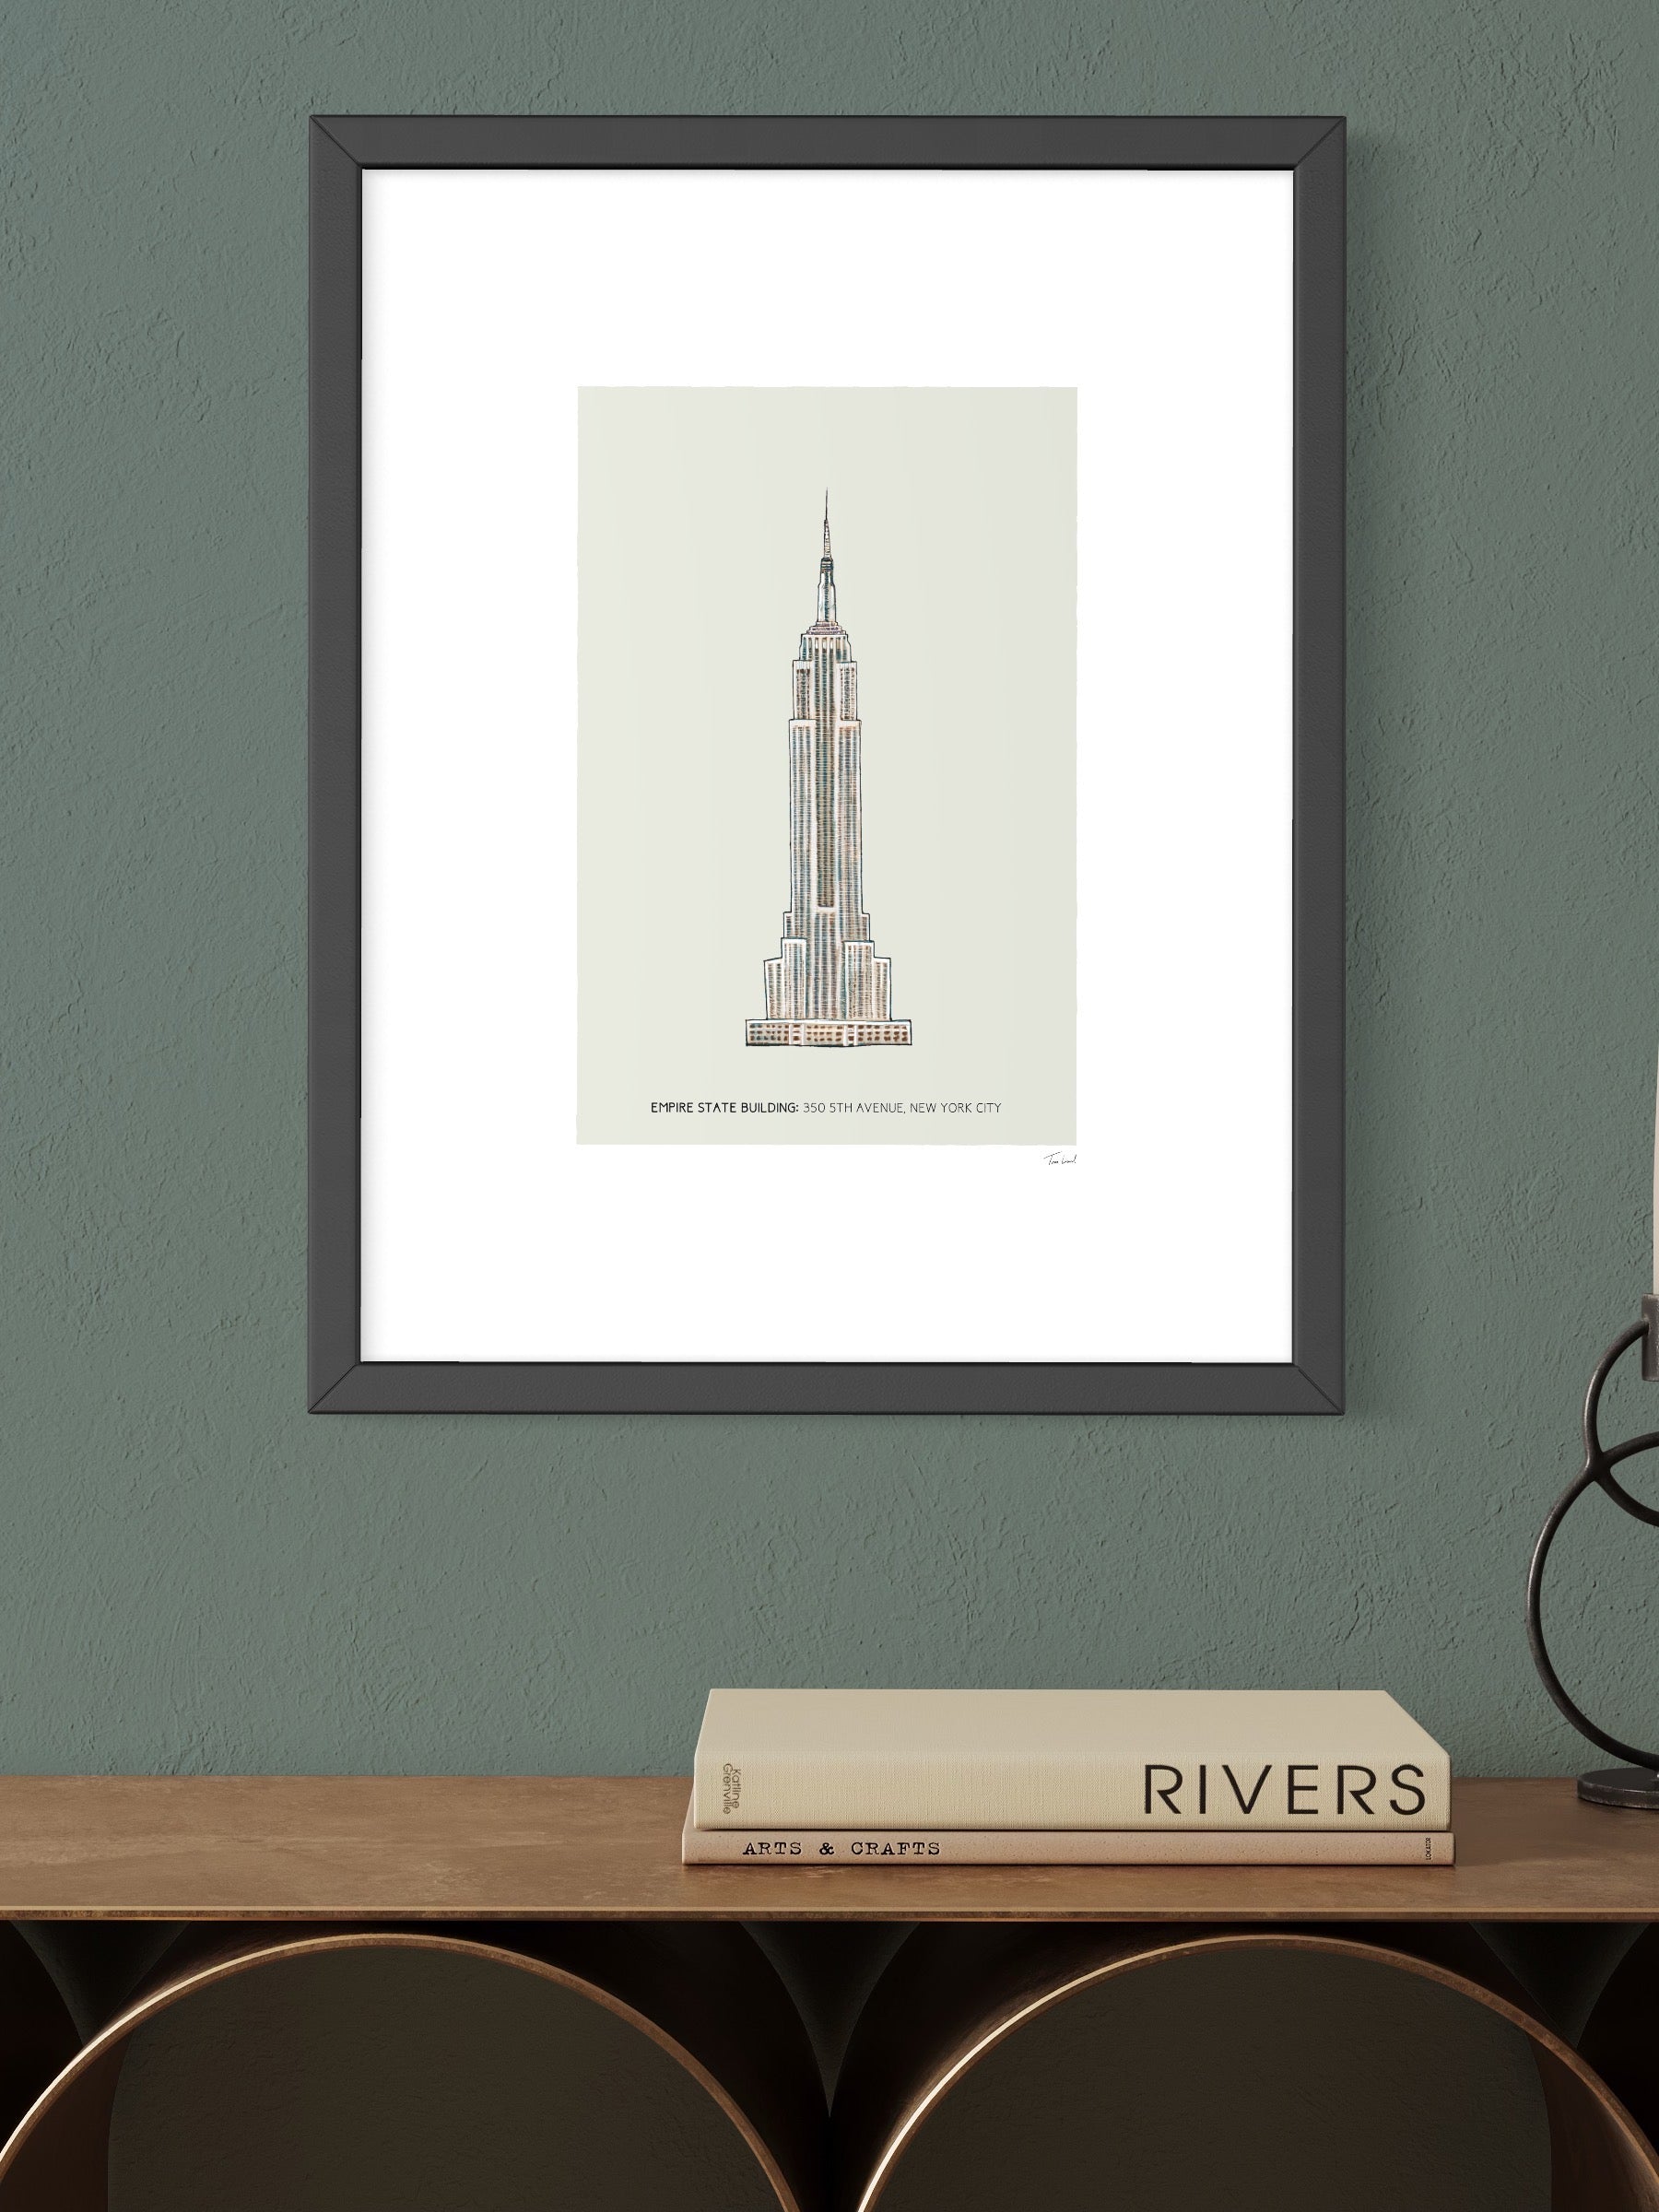 This image shows a giclee wall art print by Tom Laird Illustration of the world-famous New York City landmark the Empire State Building, framed in a beautiful living room with tasteful modern home decor. This art print is available from Tom Laird Illustration in A4 size.